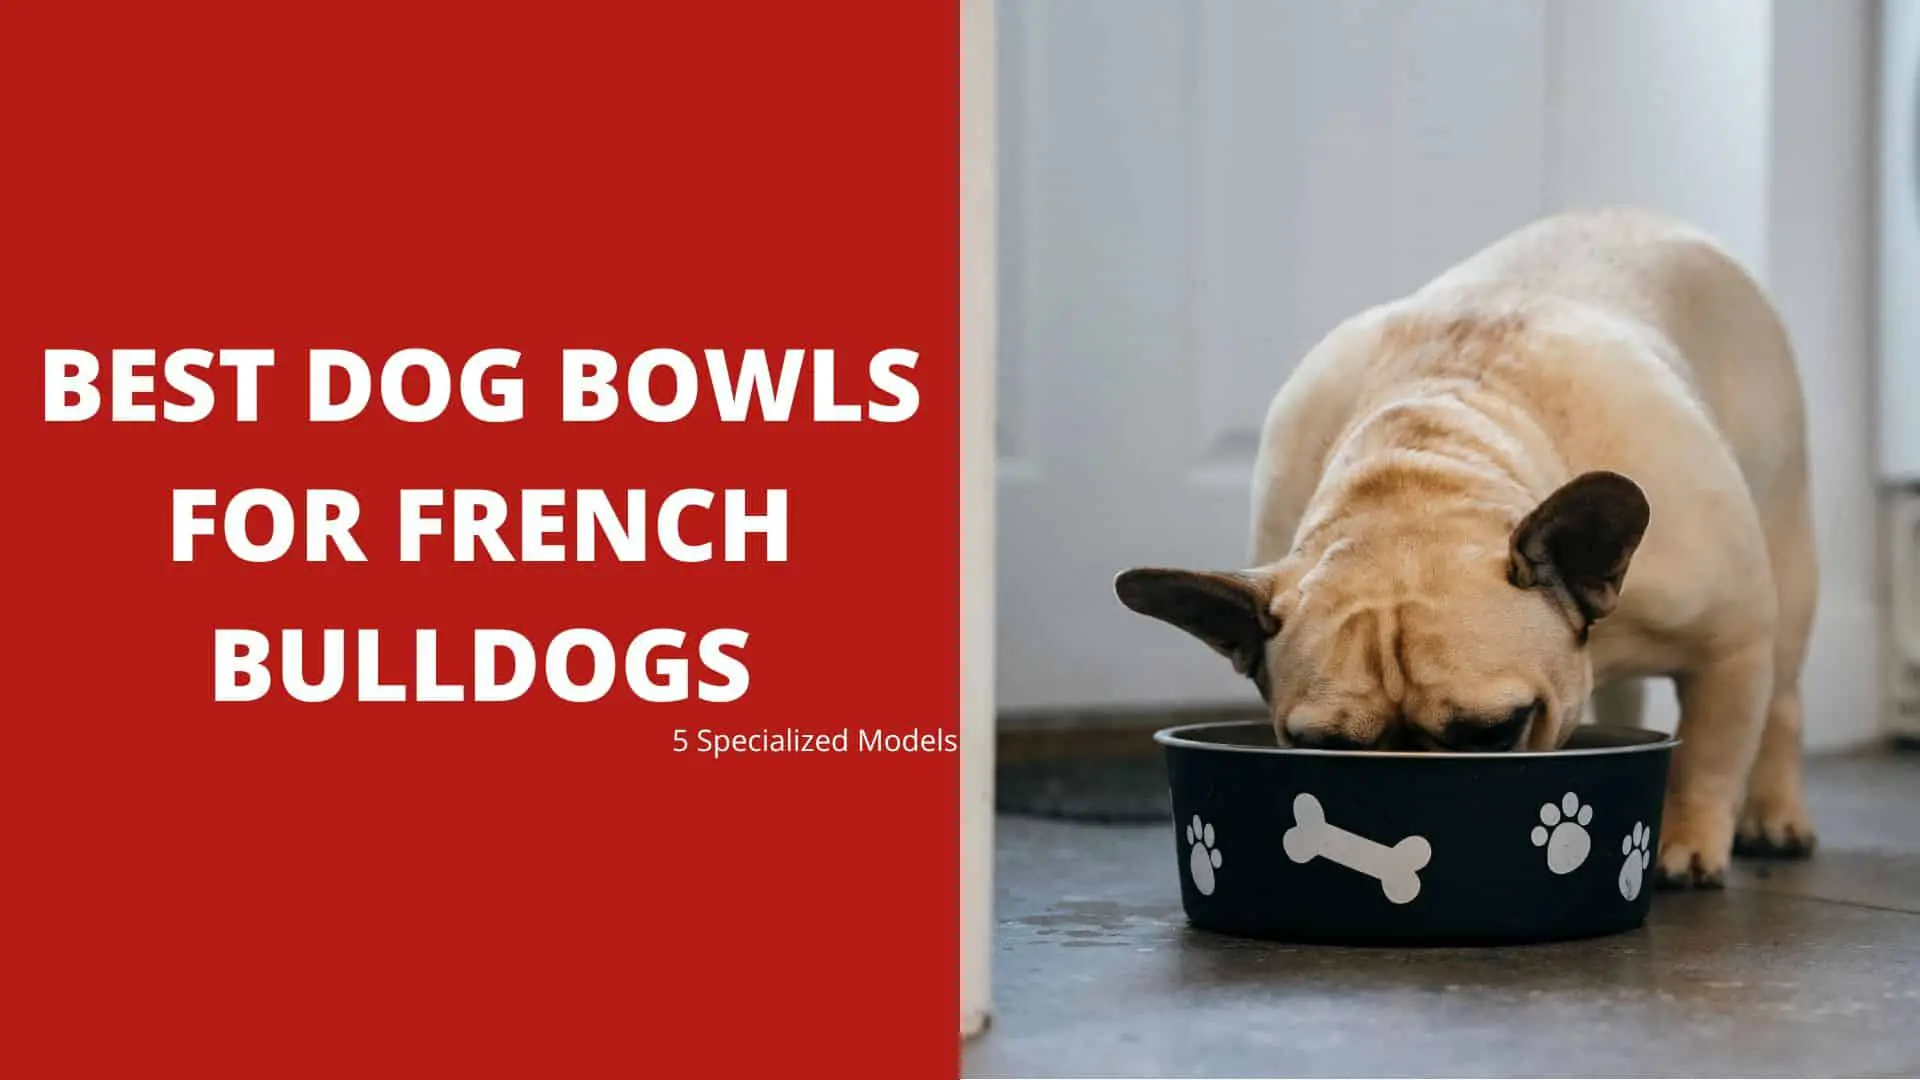 Best Dog Bowls for French Bulldogs – 5 Specialized Models